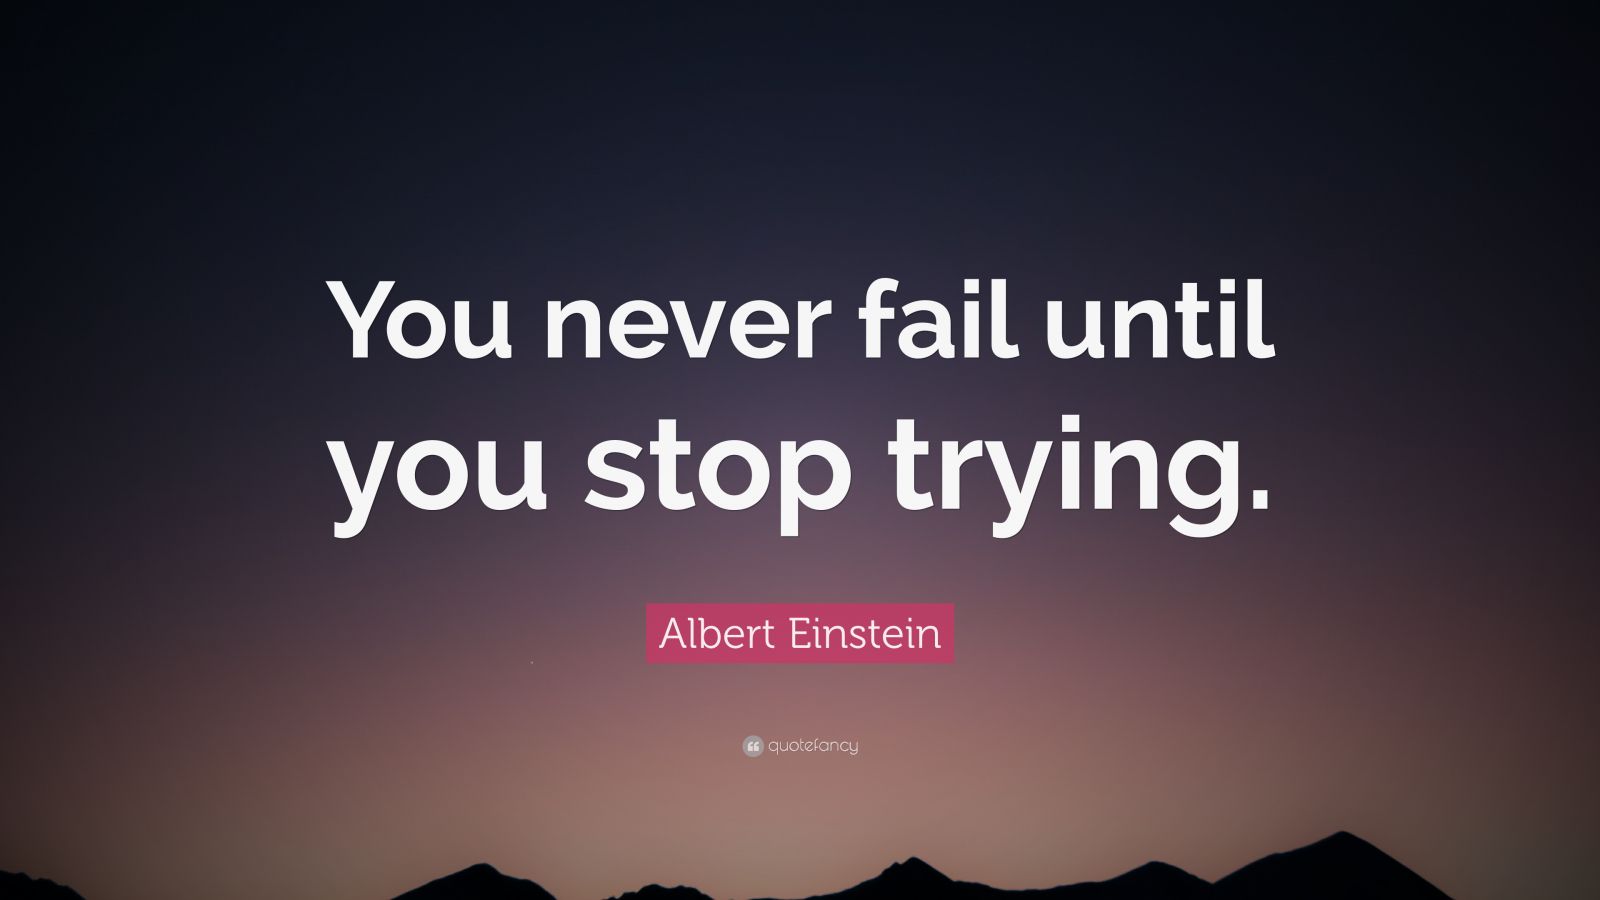 Albert Einstein Quote: “You never fail until you stop trying.” (35 ...